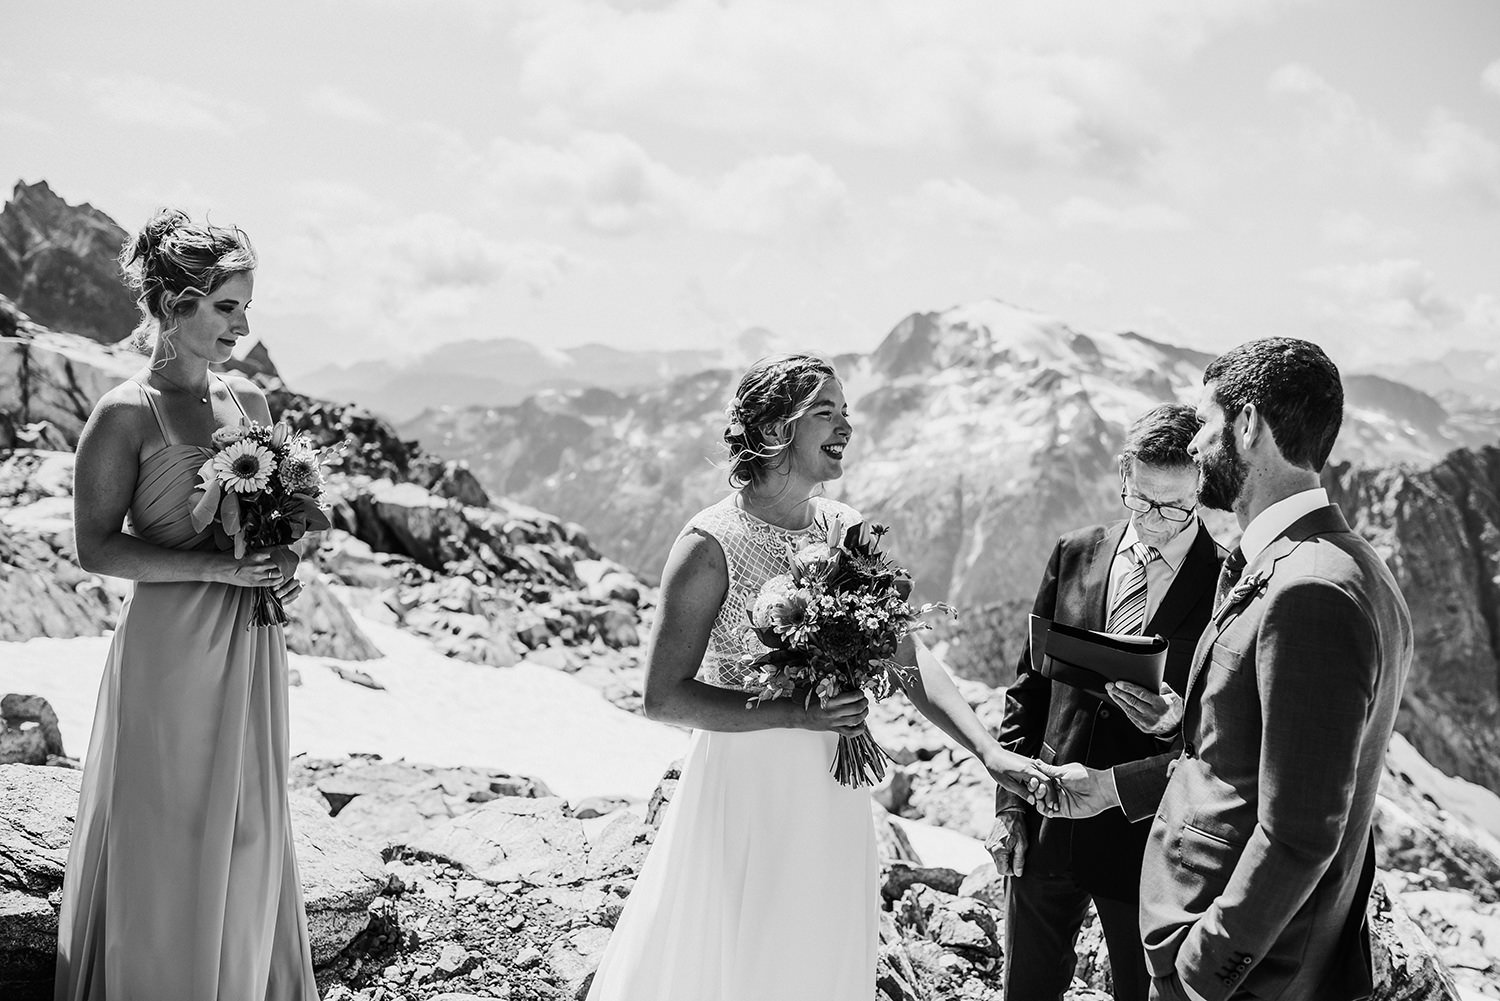 Squamish elopement in the mountains with Black Tusk Helicopter